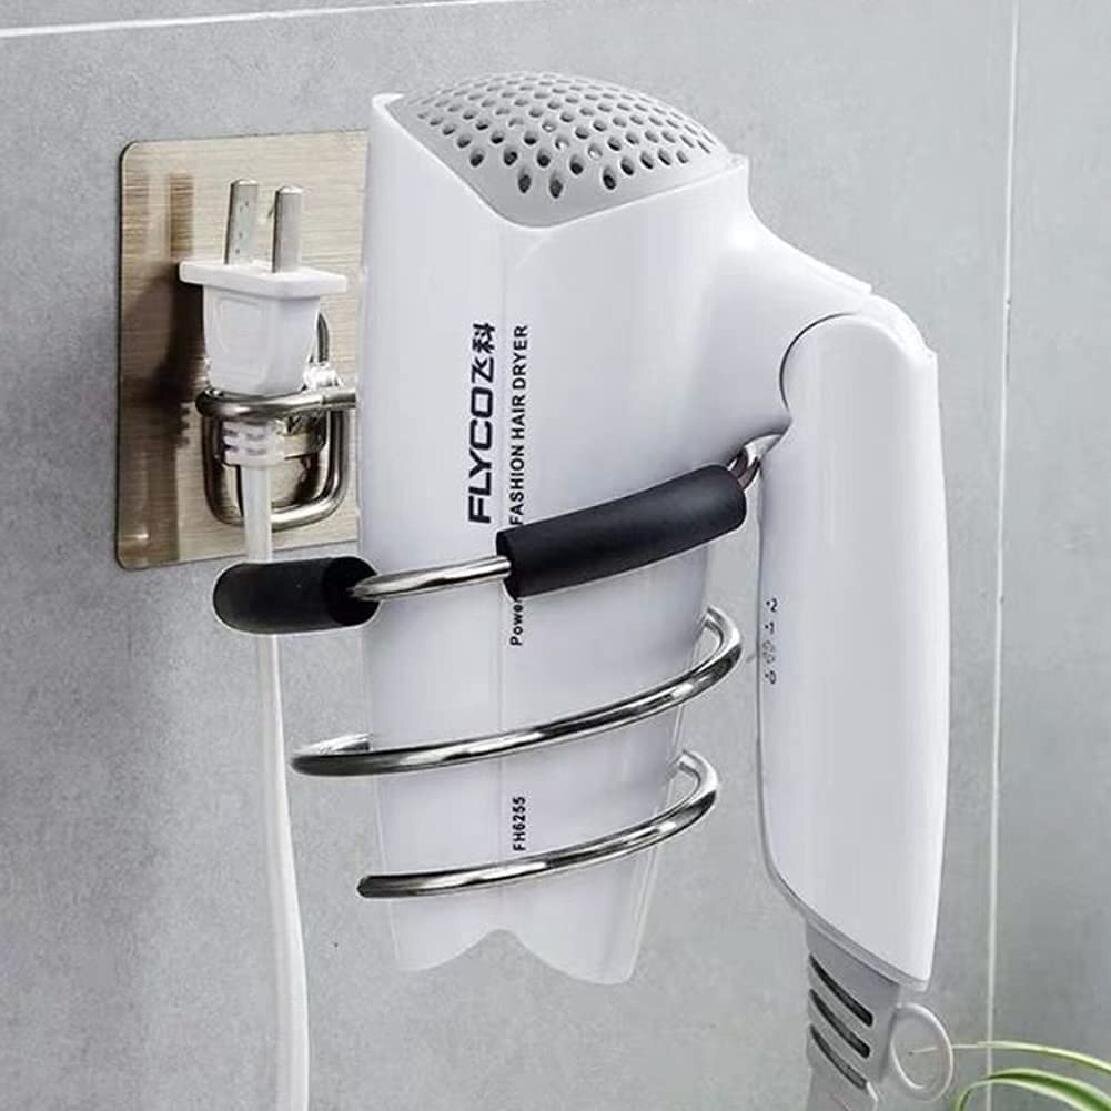 Hair Dryer Holder Wall Mount,Hair Dryer Holder,Hair Dryer Storage Rack,Hair Dryer Organiser With 2 Storage Boxes No Drilling Waterproof Strong Adhesive A